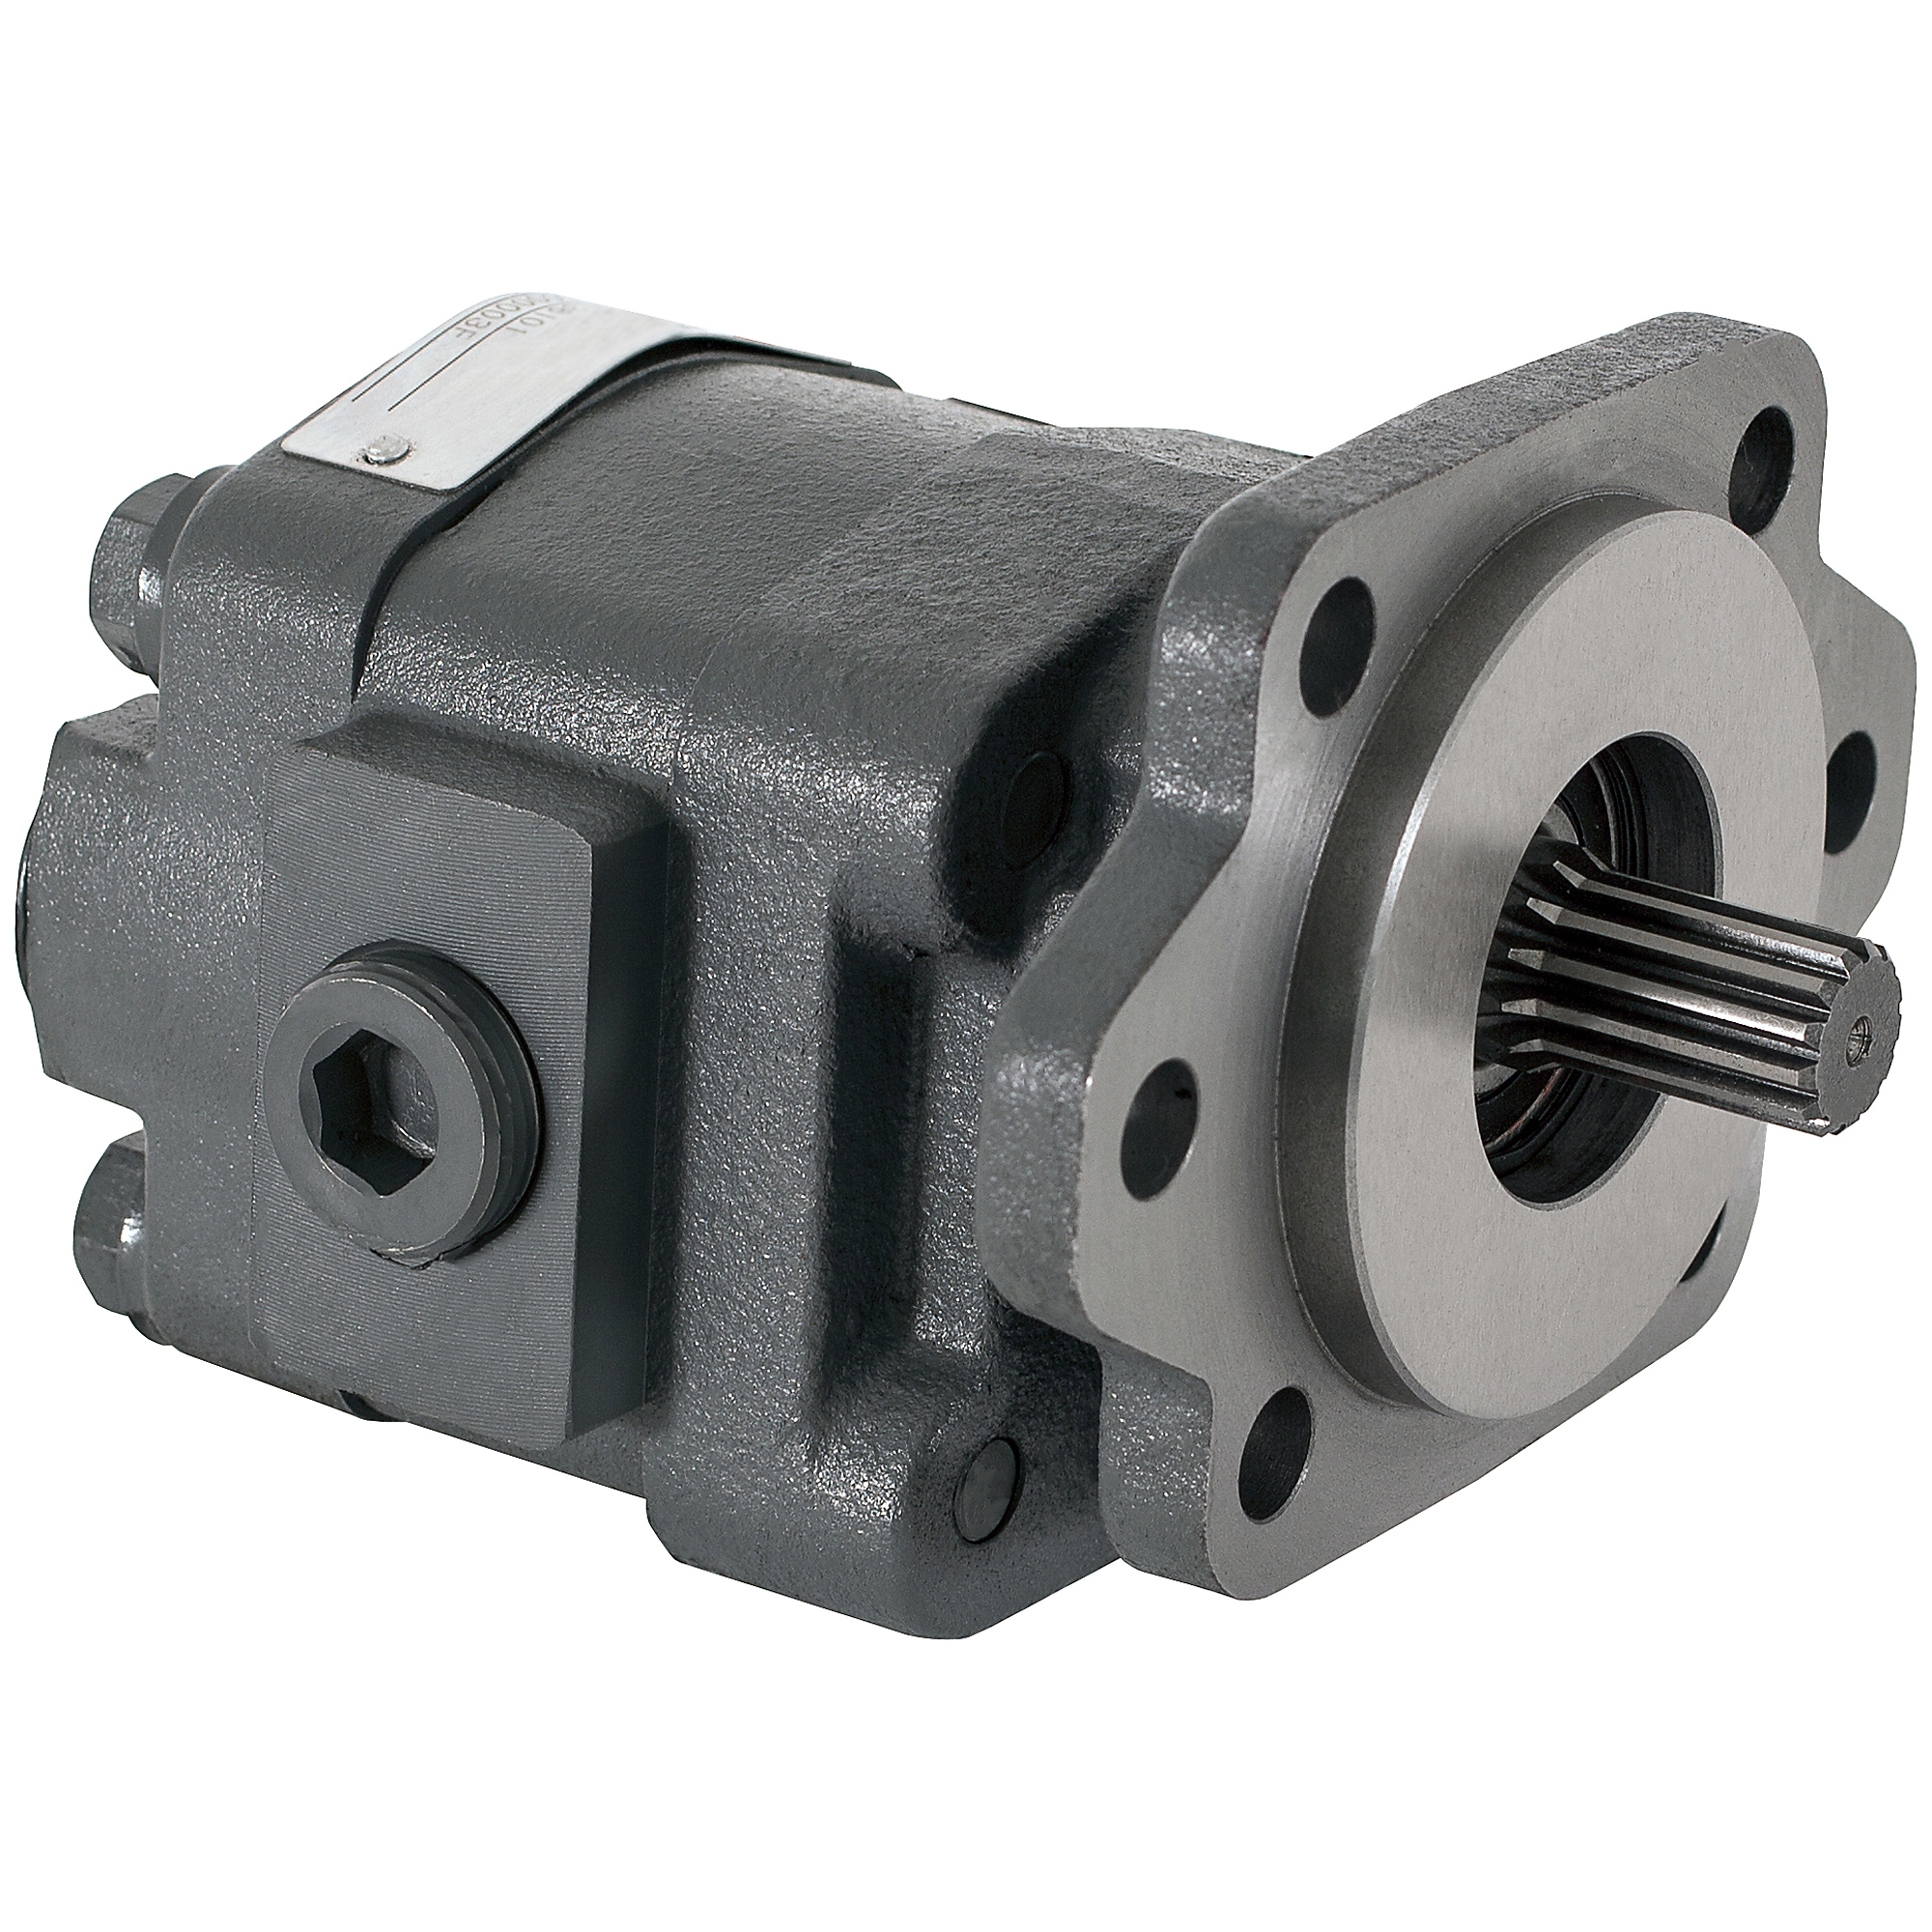 Buyers Products, Hydraulic Pump 2/4 BOLT 7/8-13 Max. PSI 2500 Max. RPM 2000 Max. Flow Rate 27.3 GPM, Model H2136171